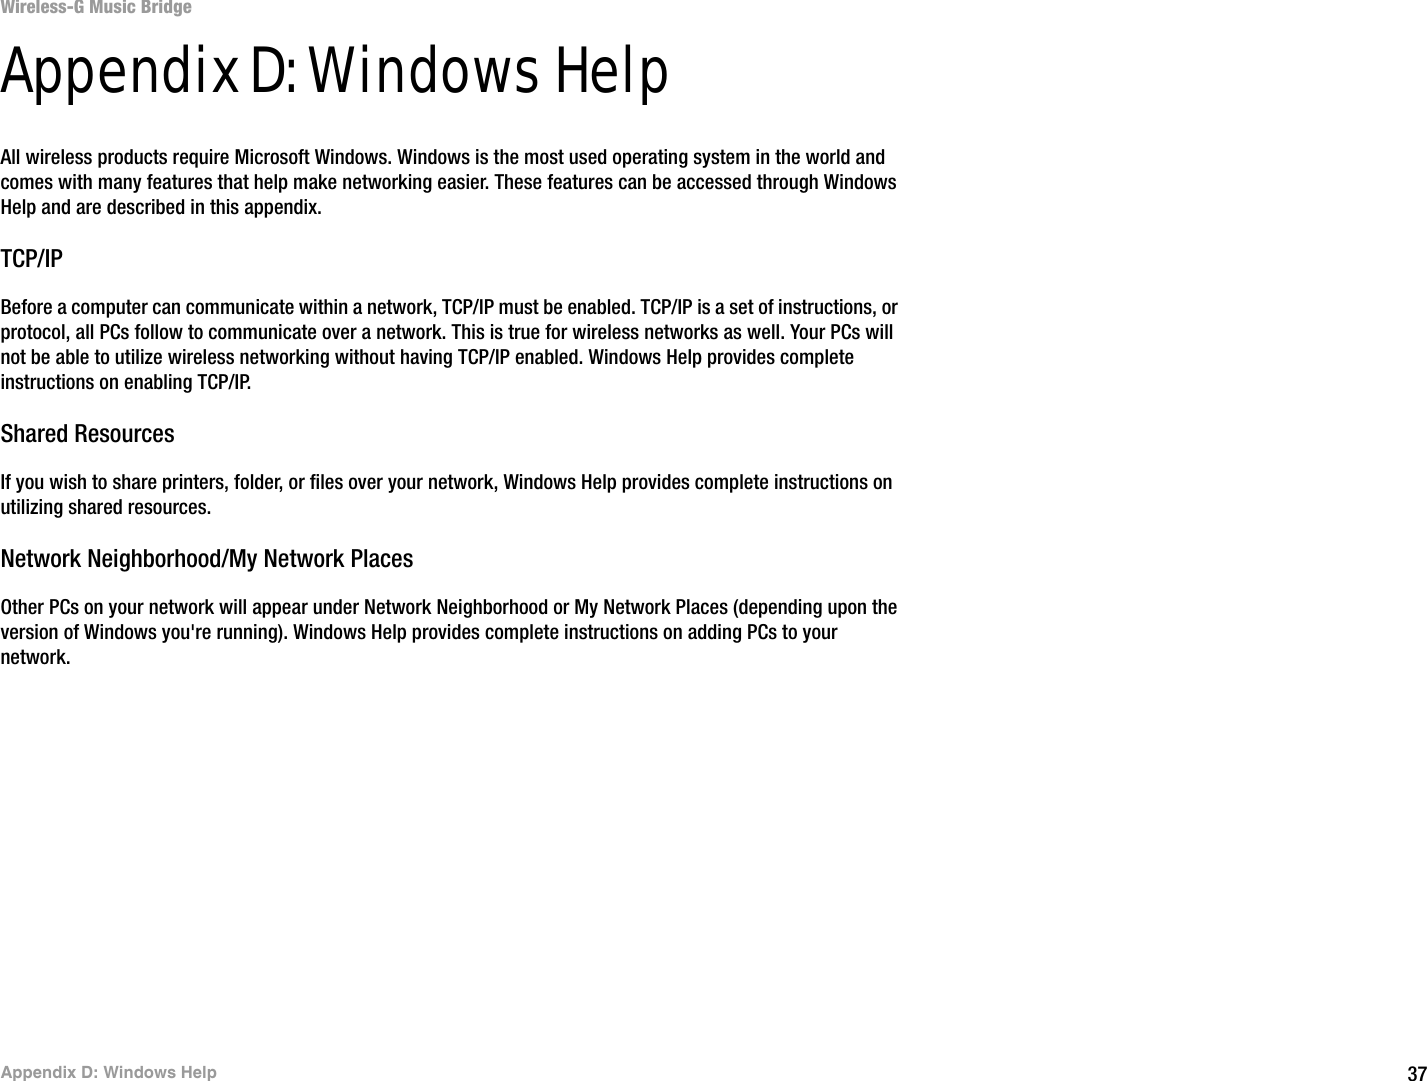 37Appendix D: Windows HelpWireless-G Music BridgeAppendix D: Windows HelpAll wireless products require Microsoft Windows. Windows is the most used operating system in the world and comes with many features that help make networking easier. These features can be accessed through Windows Help and are described in this appendix.TCP/IPBefore a computer can communicate within a network, TCP/IP must be enabled. TCP/IP is a set of instructions, or protocol, all PCs follow to communicate over a network. This is true for wireless networks as well. Your PCs will not be able to utilize wireless networking without having TCP/IP enabled. Windows Help provides complete instructions on enabling TCP/IP.Shared ResourcesIf you wish to share printers, folder, or files over your network, Windows Help provides complete instructions on utilizing shared resources.Network Neighborhood/My Network PlacesOther PCs on your network will appear under Network Neighborhood or My Network Places (depending upon the version of Windows you&apos;re running). Windows Help provides complete instructions on adding PCs to your network.